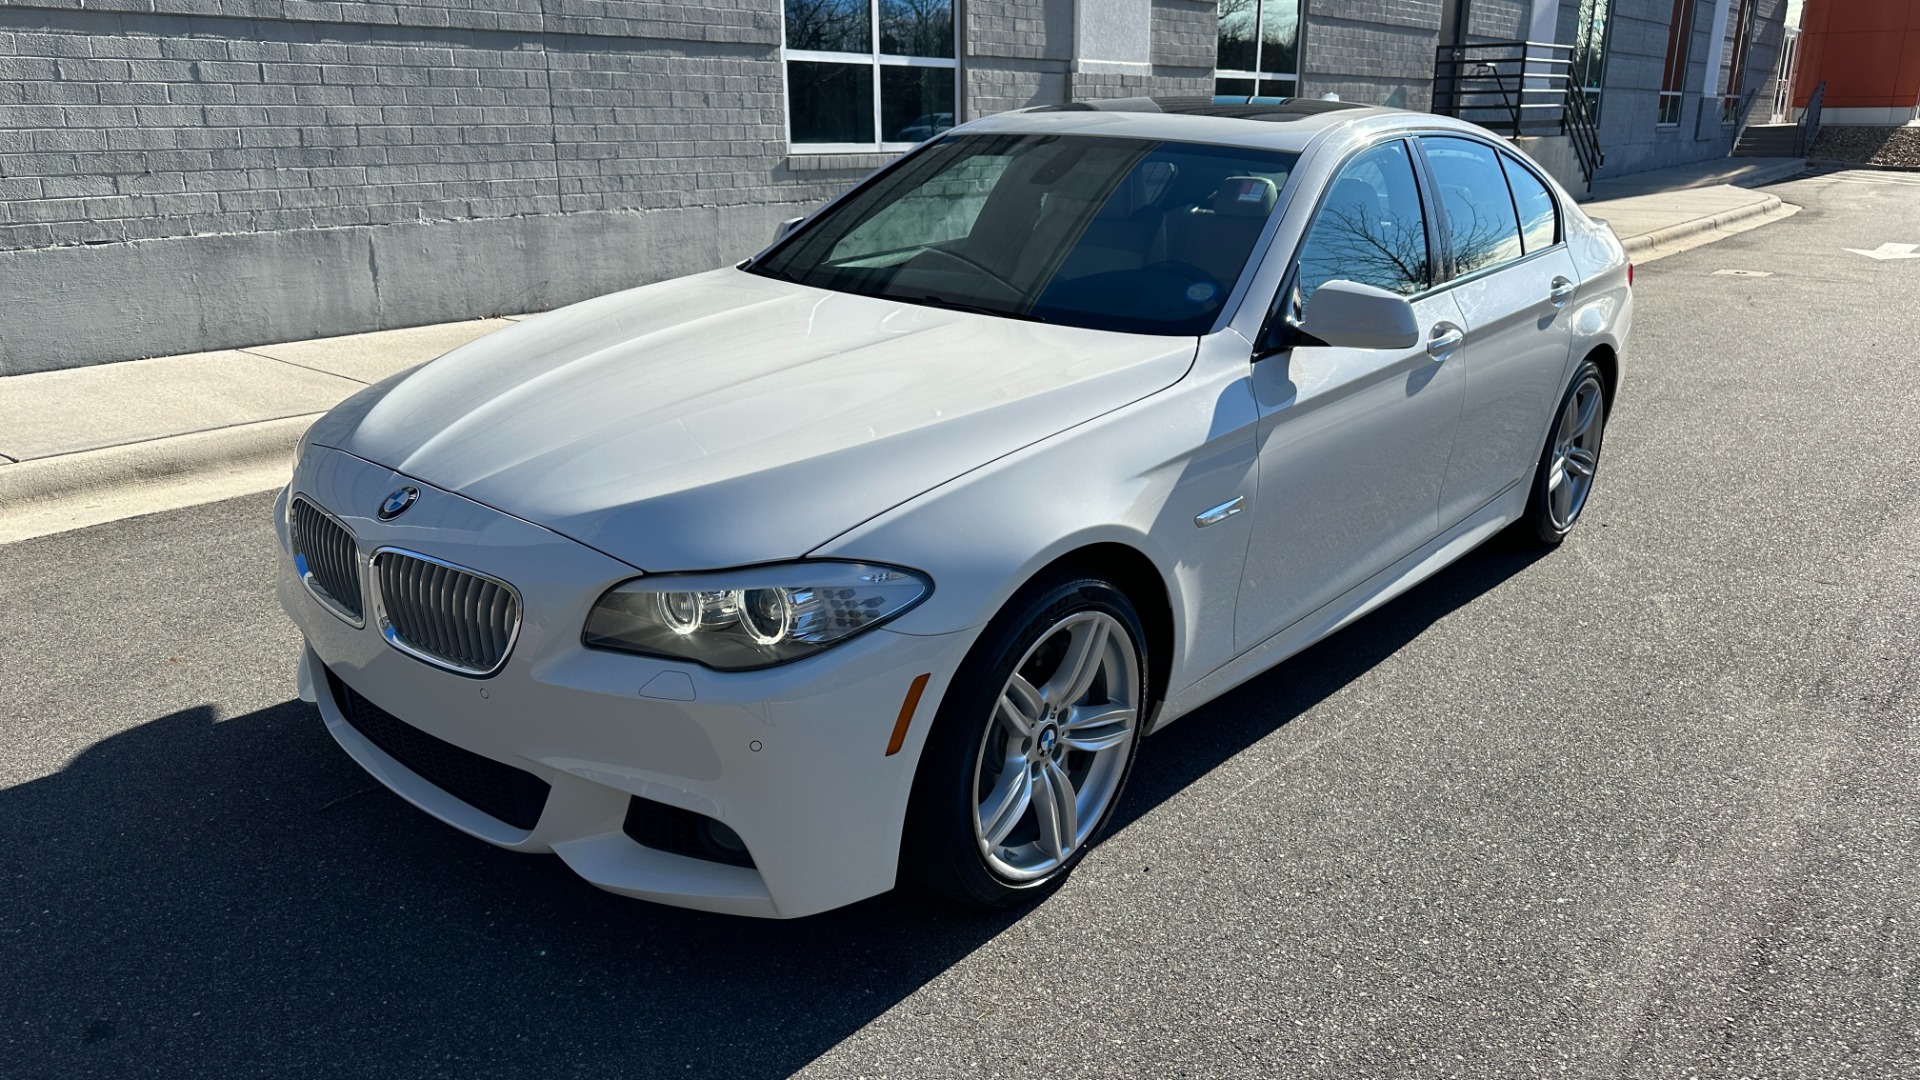 Used 2012 BMW 5 Series 550i M SPORT / PREMIUM SOUND / CONVENIENCE / HEADS UP DISPLAY / HEATED SEAT for sale $20,995 at Formula Imports in Charlotte NC 28227 2